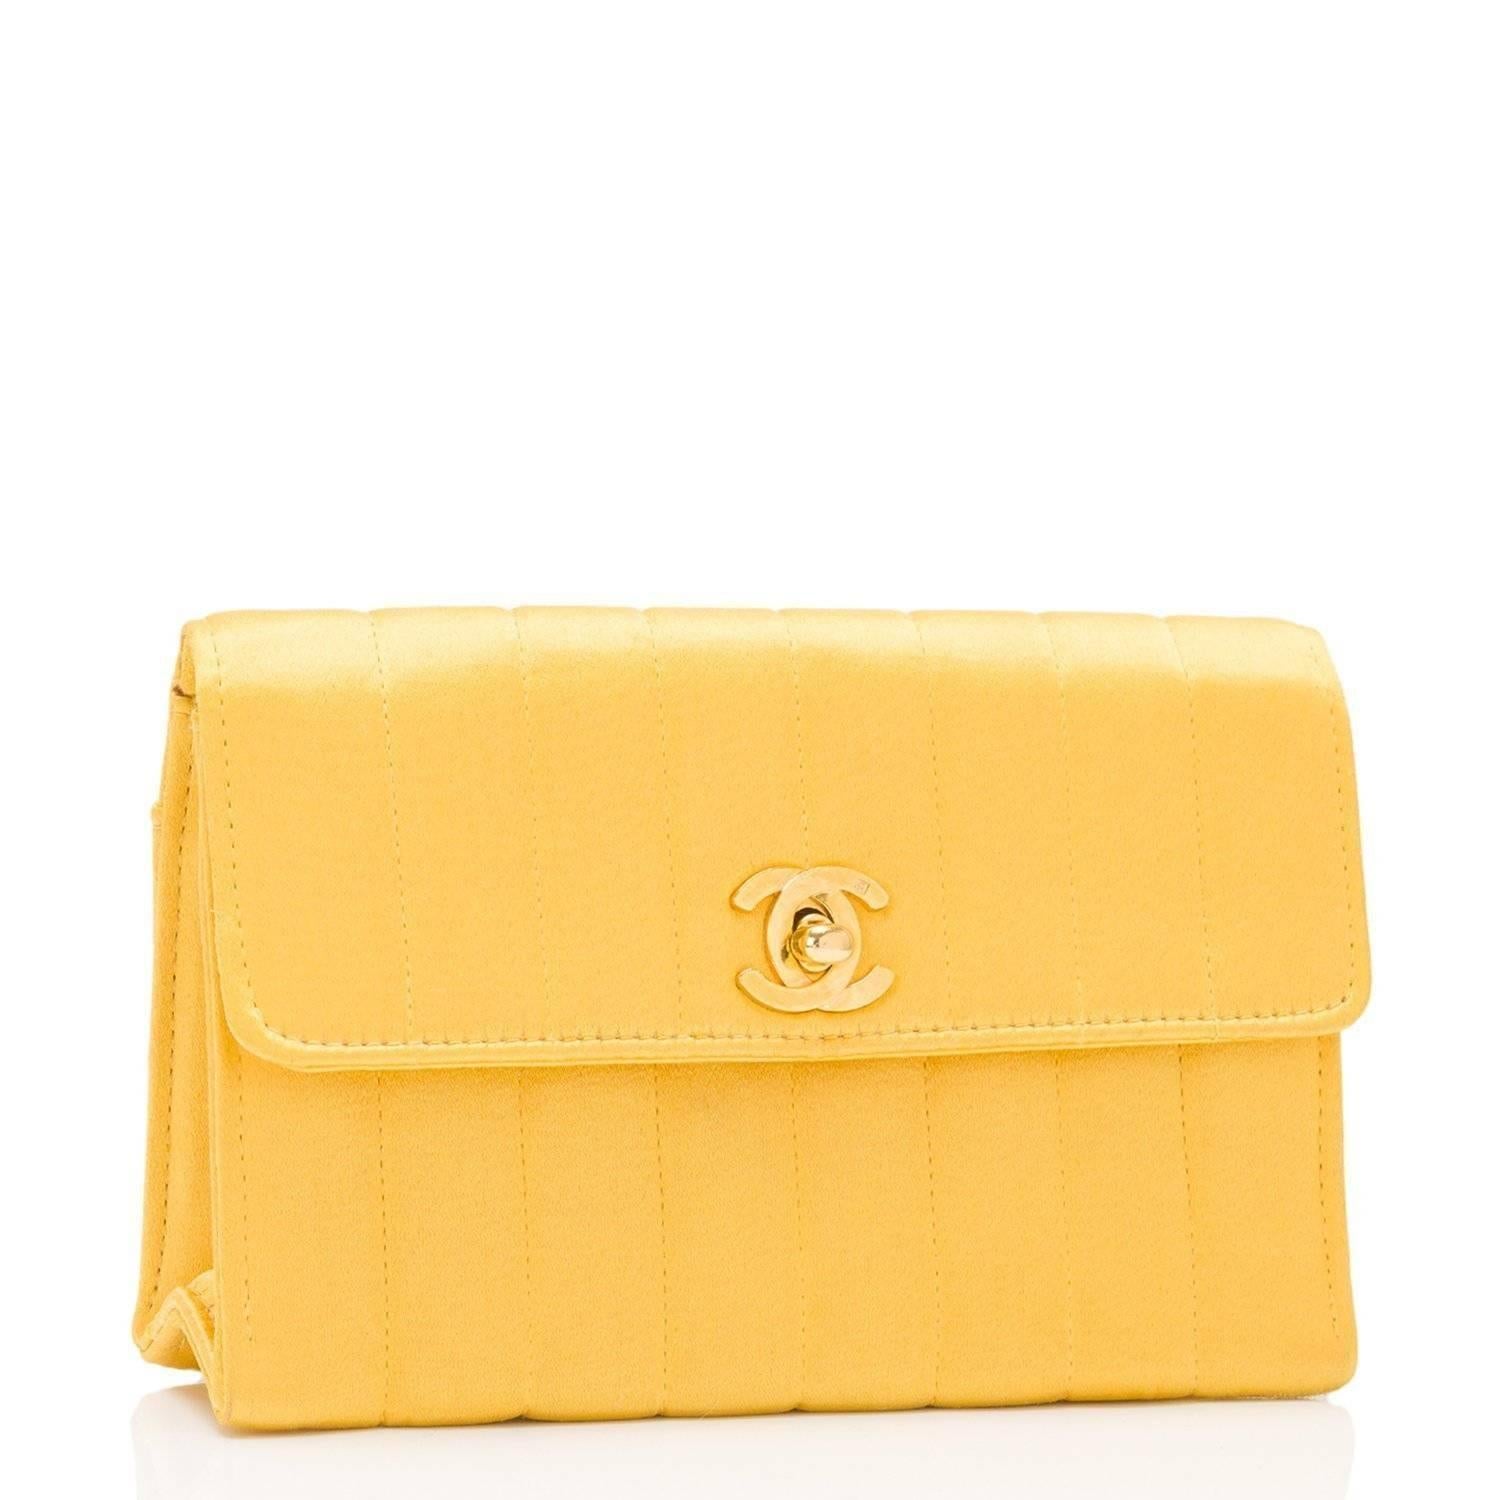 Chanel vintage Yellow vertical quilted silk satin mini flap with gold tone hardware.

This bag has a front flap with signature CC turnlock closure and 24k gold plated chain link strap.

The interior is lined in silver leather and features an open